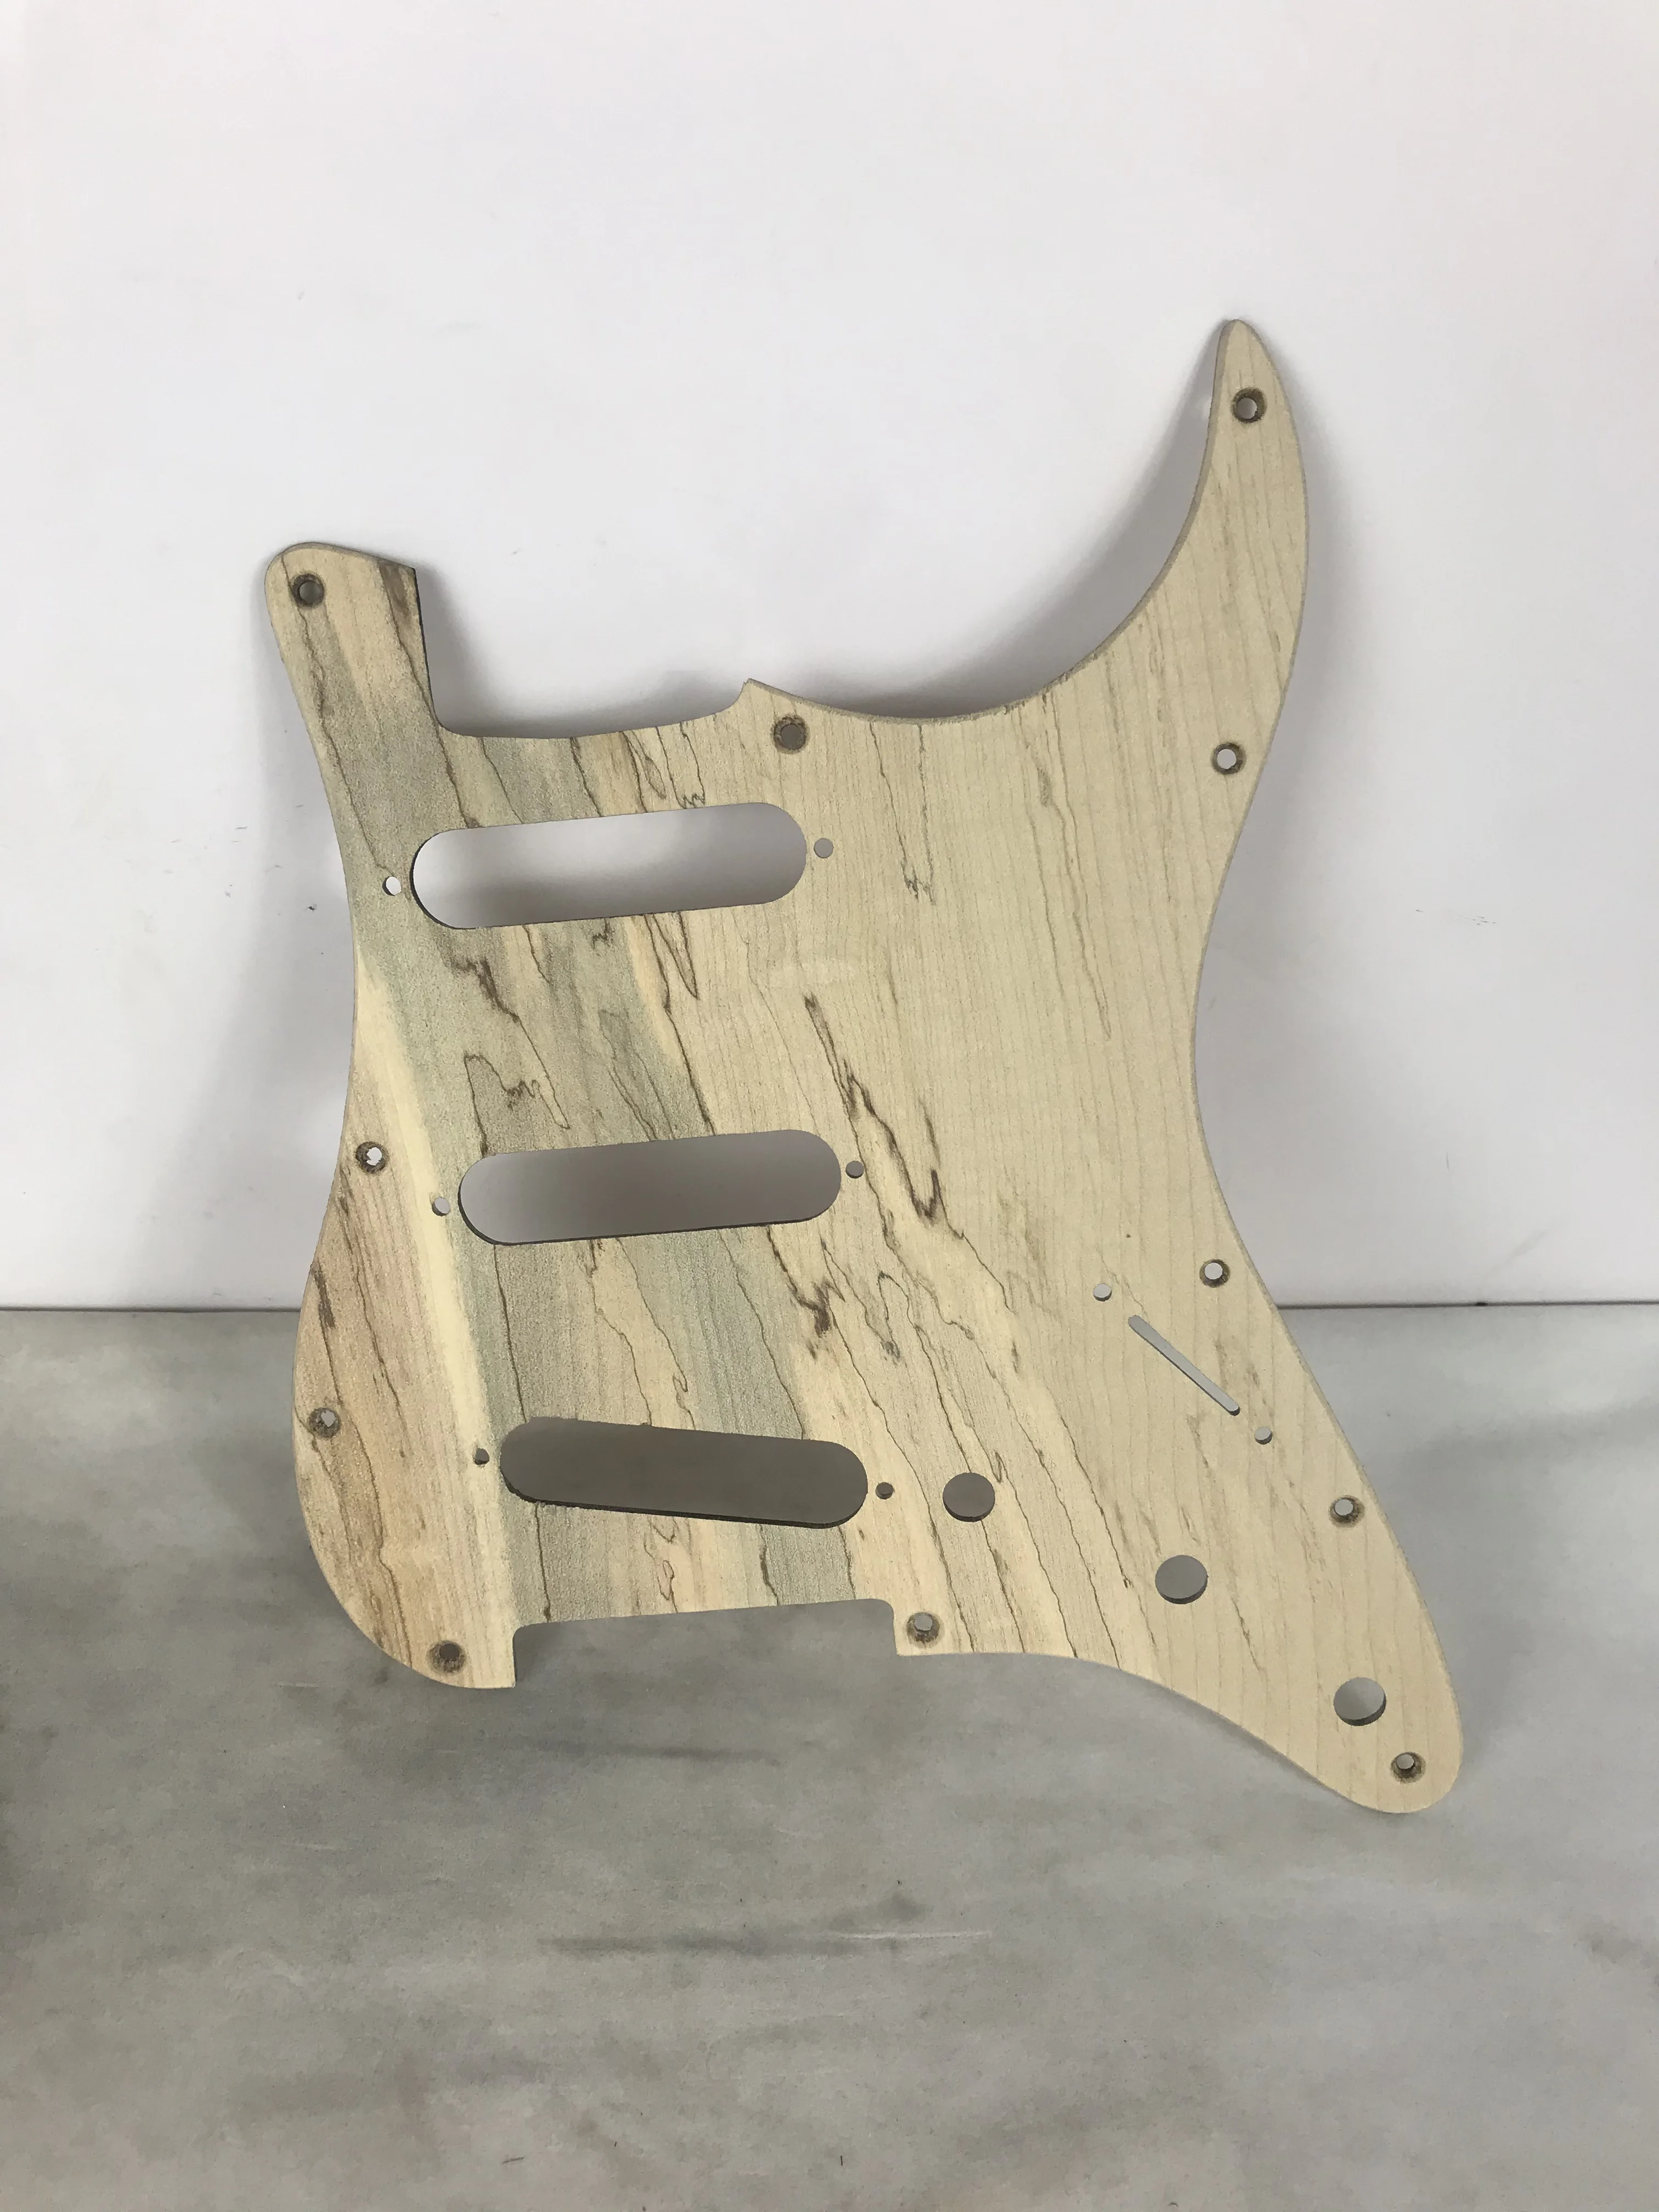 10 Pcs 11holes SSS Spalted Maple ST .Electric Guitar Pickguard Back Plate Solid Wood for Fender Style Guitar Accessories enlarge